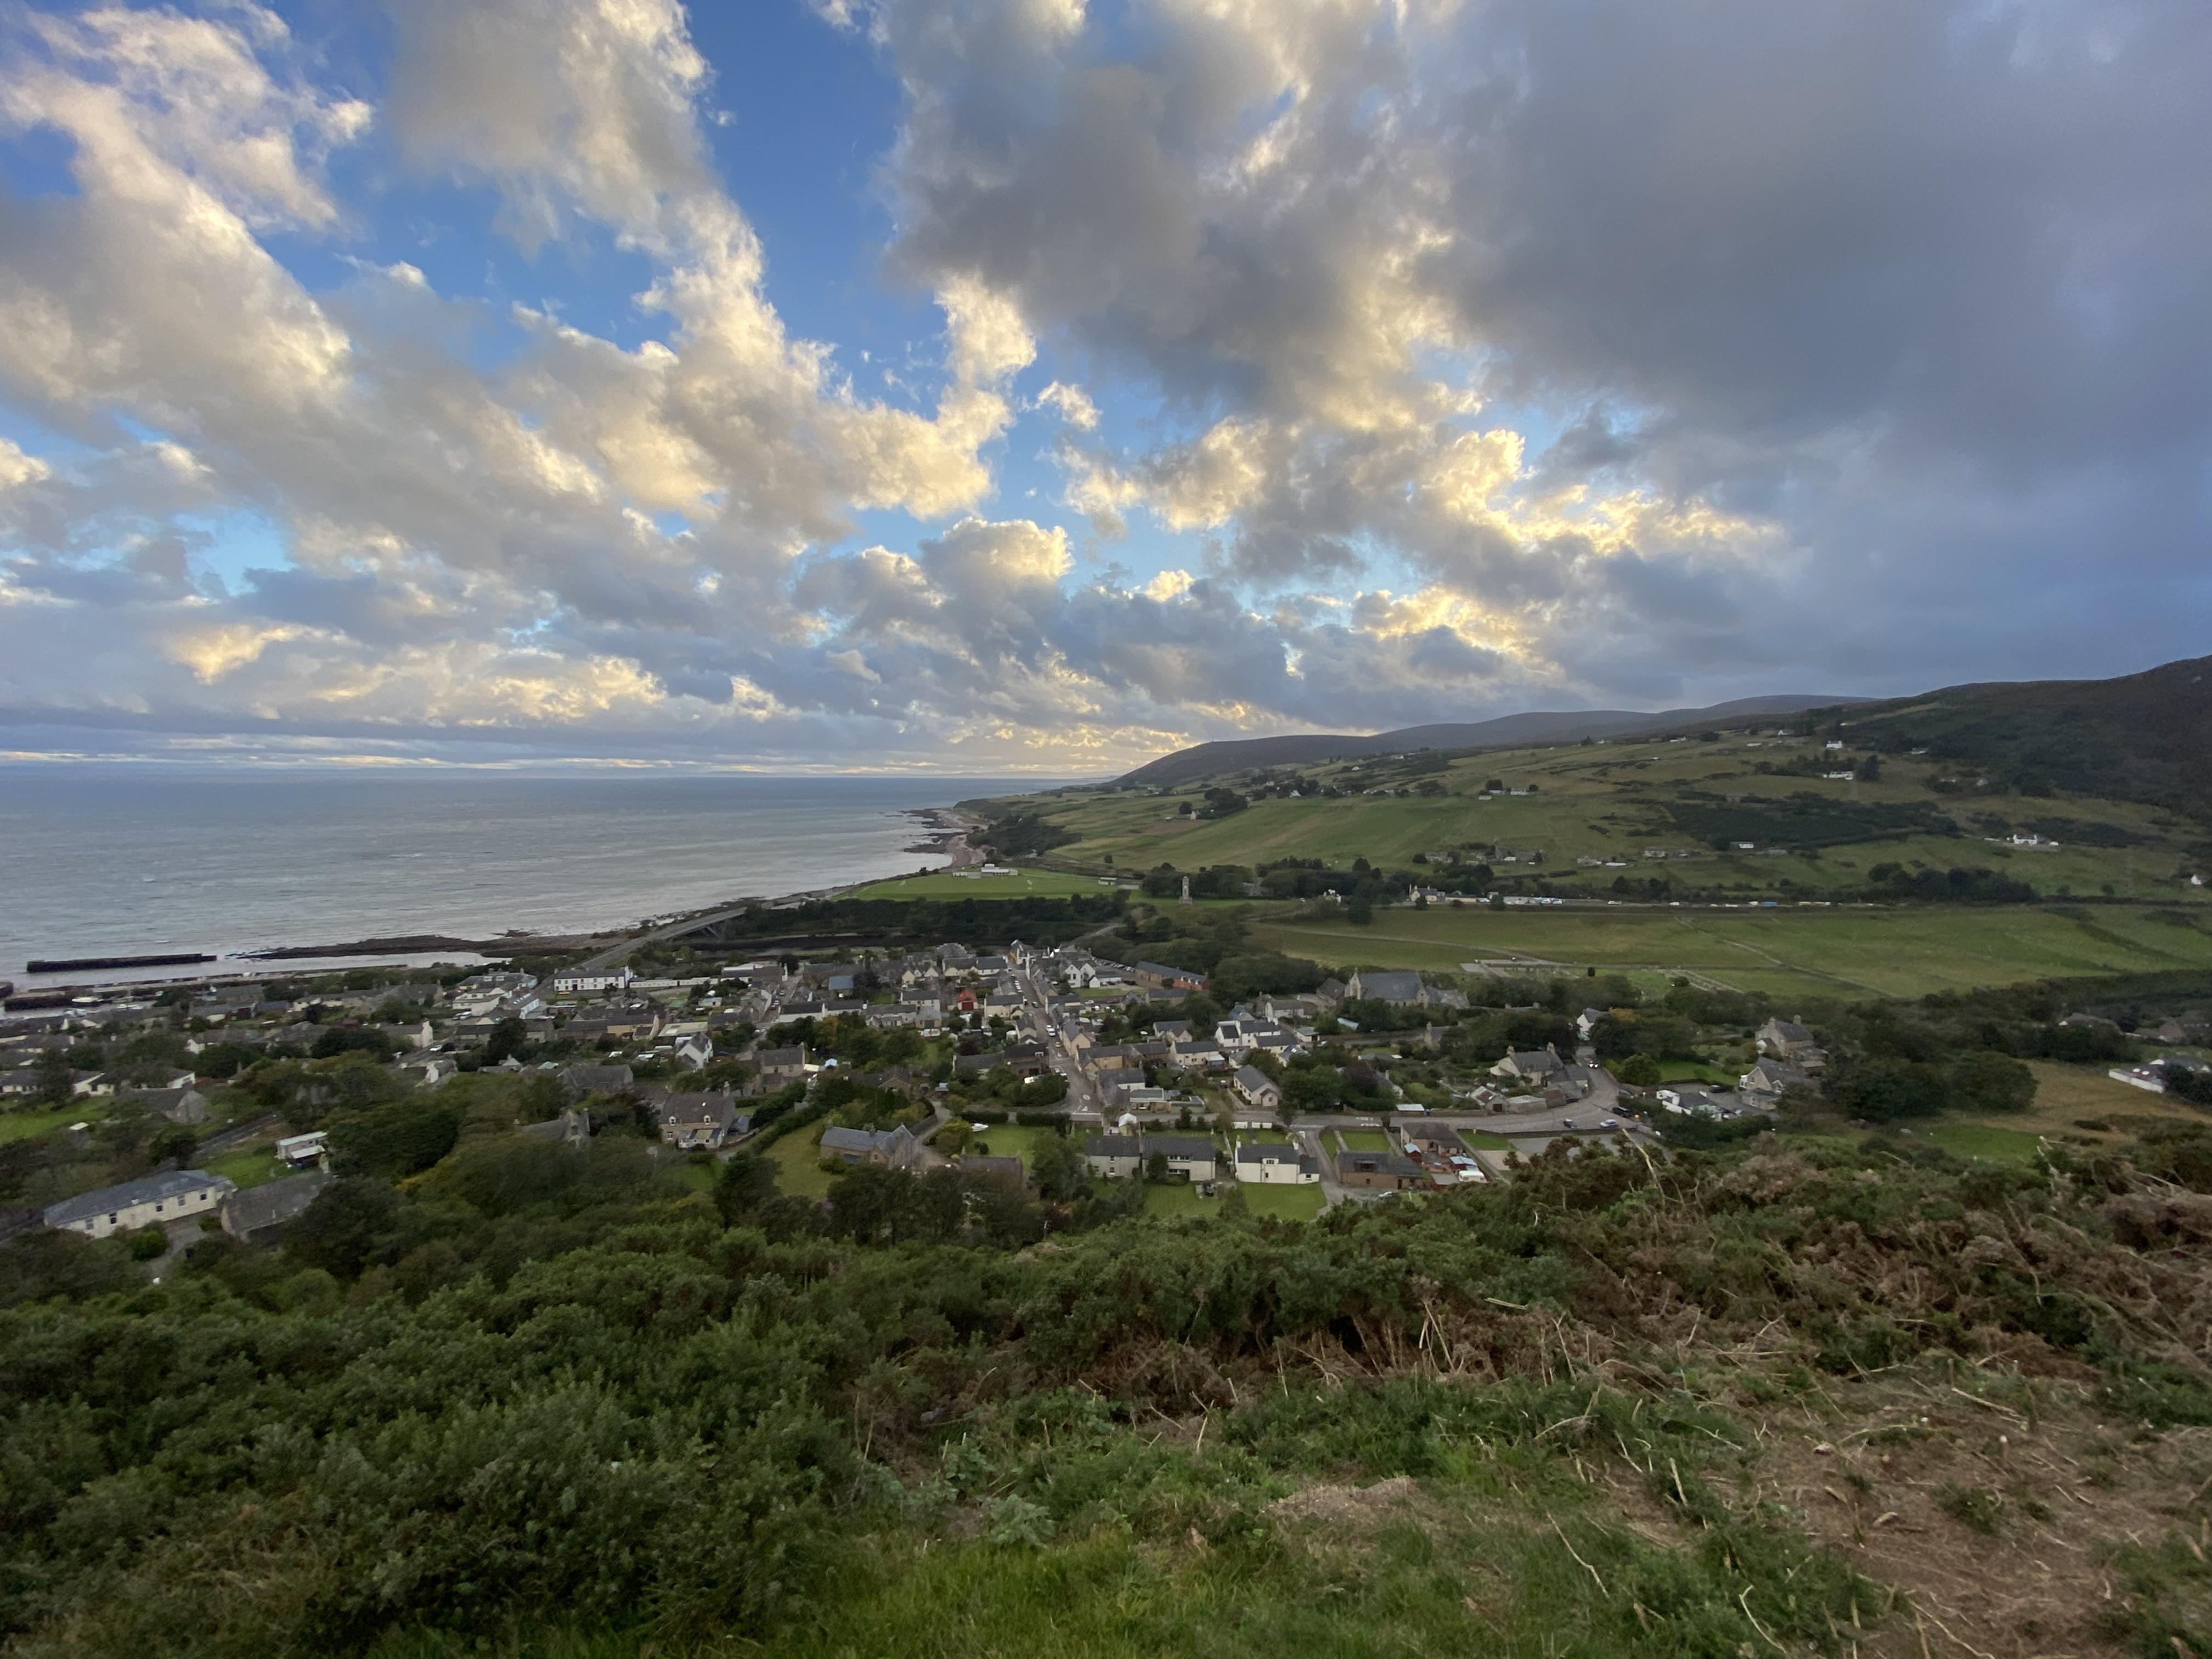 The view from the hill behind Helmsdale